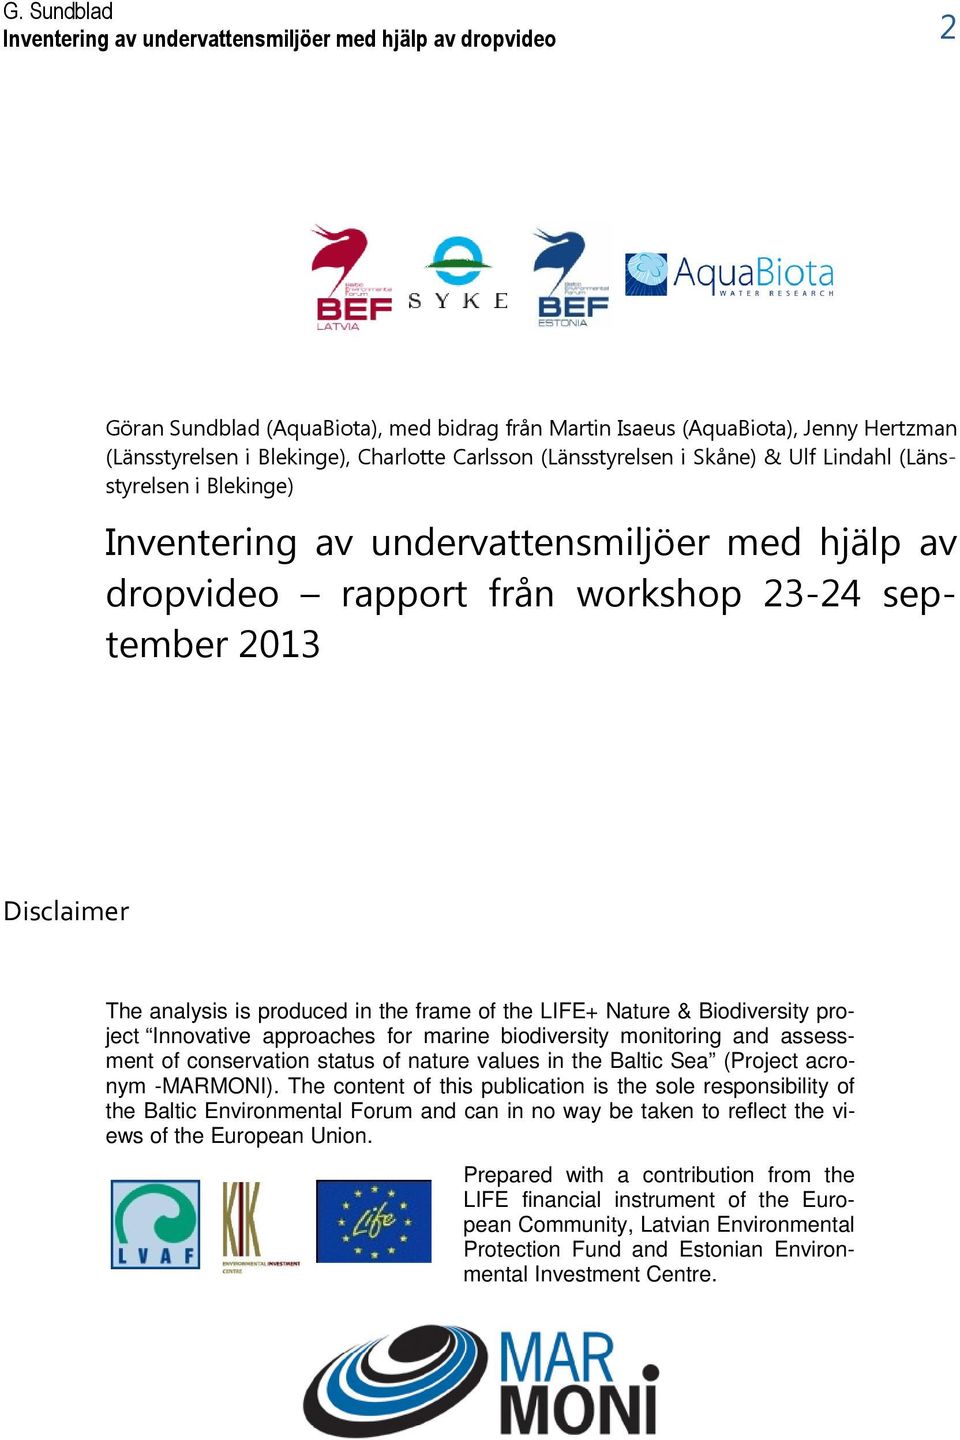 produced in the frame of the LIFE+ Nature & Biodiversity project Innovative approaches for marine biodiversity monitoring and assessment of conservation status of nature values in the Baltic Sea